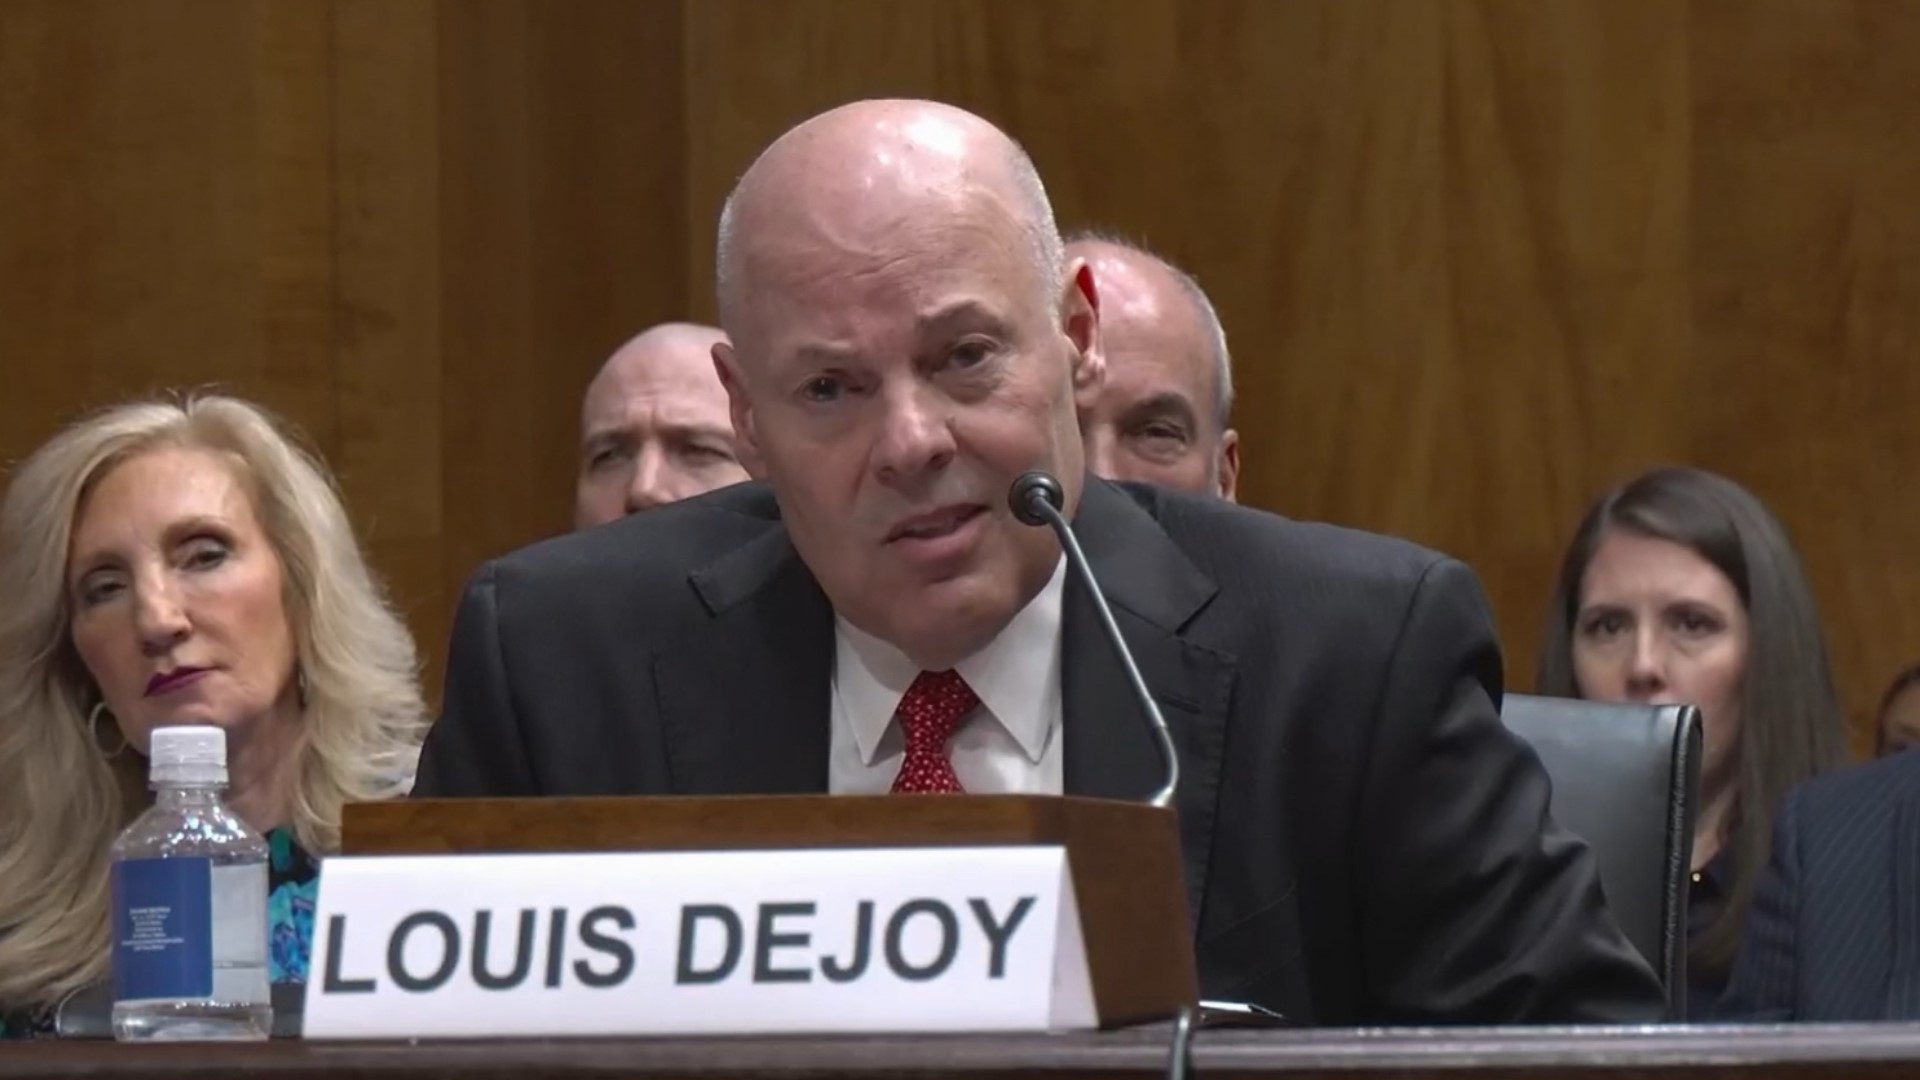 Postmaster General Louis DeJoy was in the hot seat on Tuesday at a U.S. Senate hearing about ongoing USPS problems that we first told you about in December.